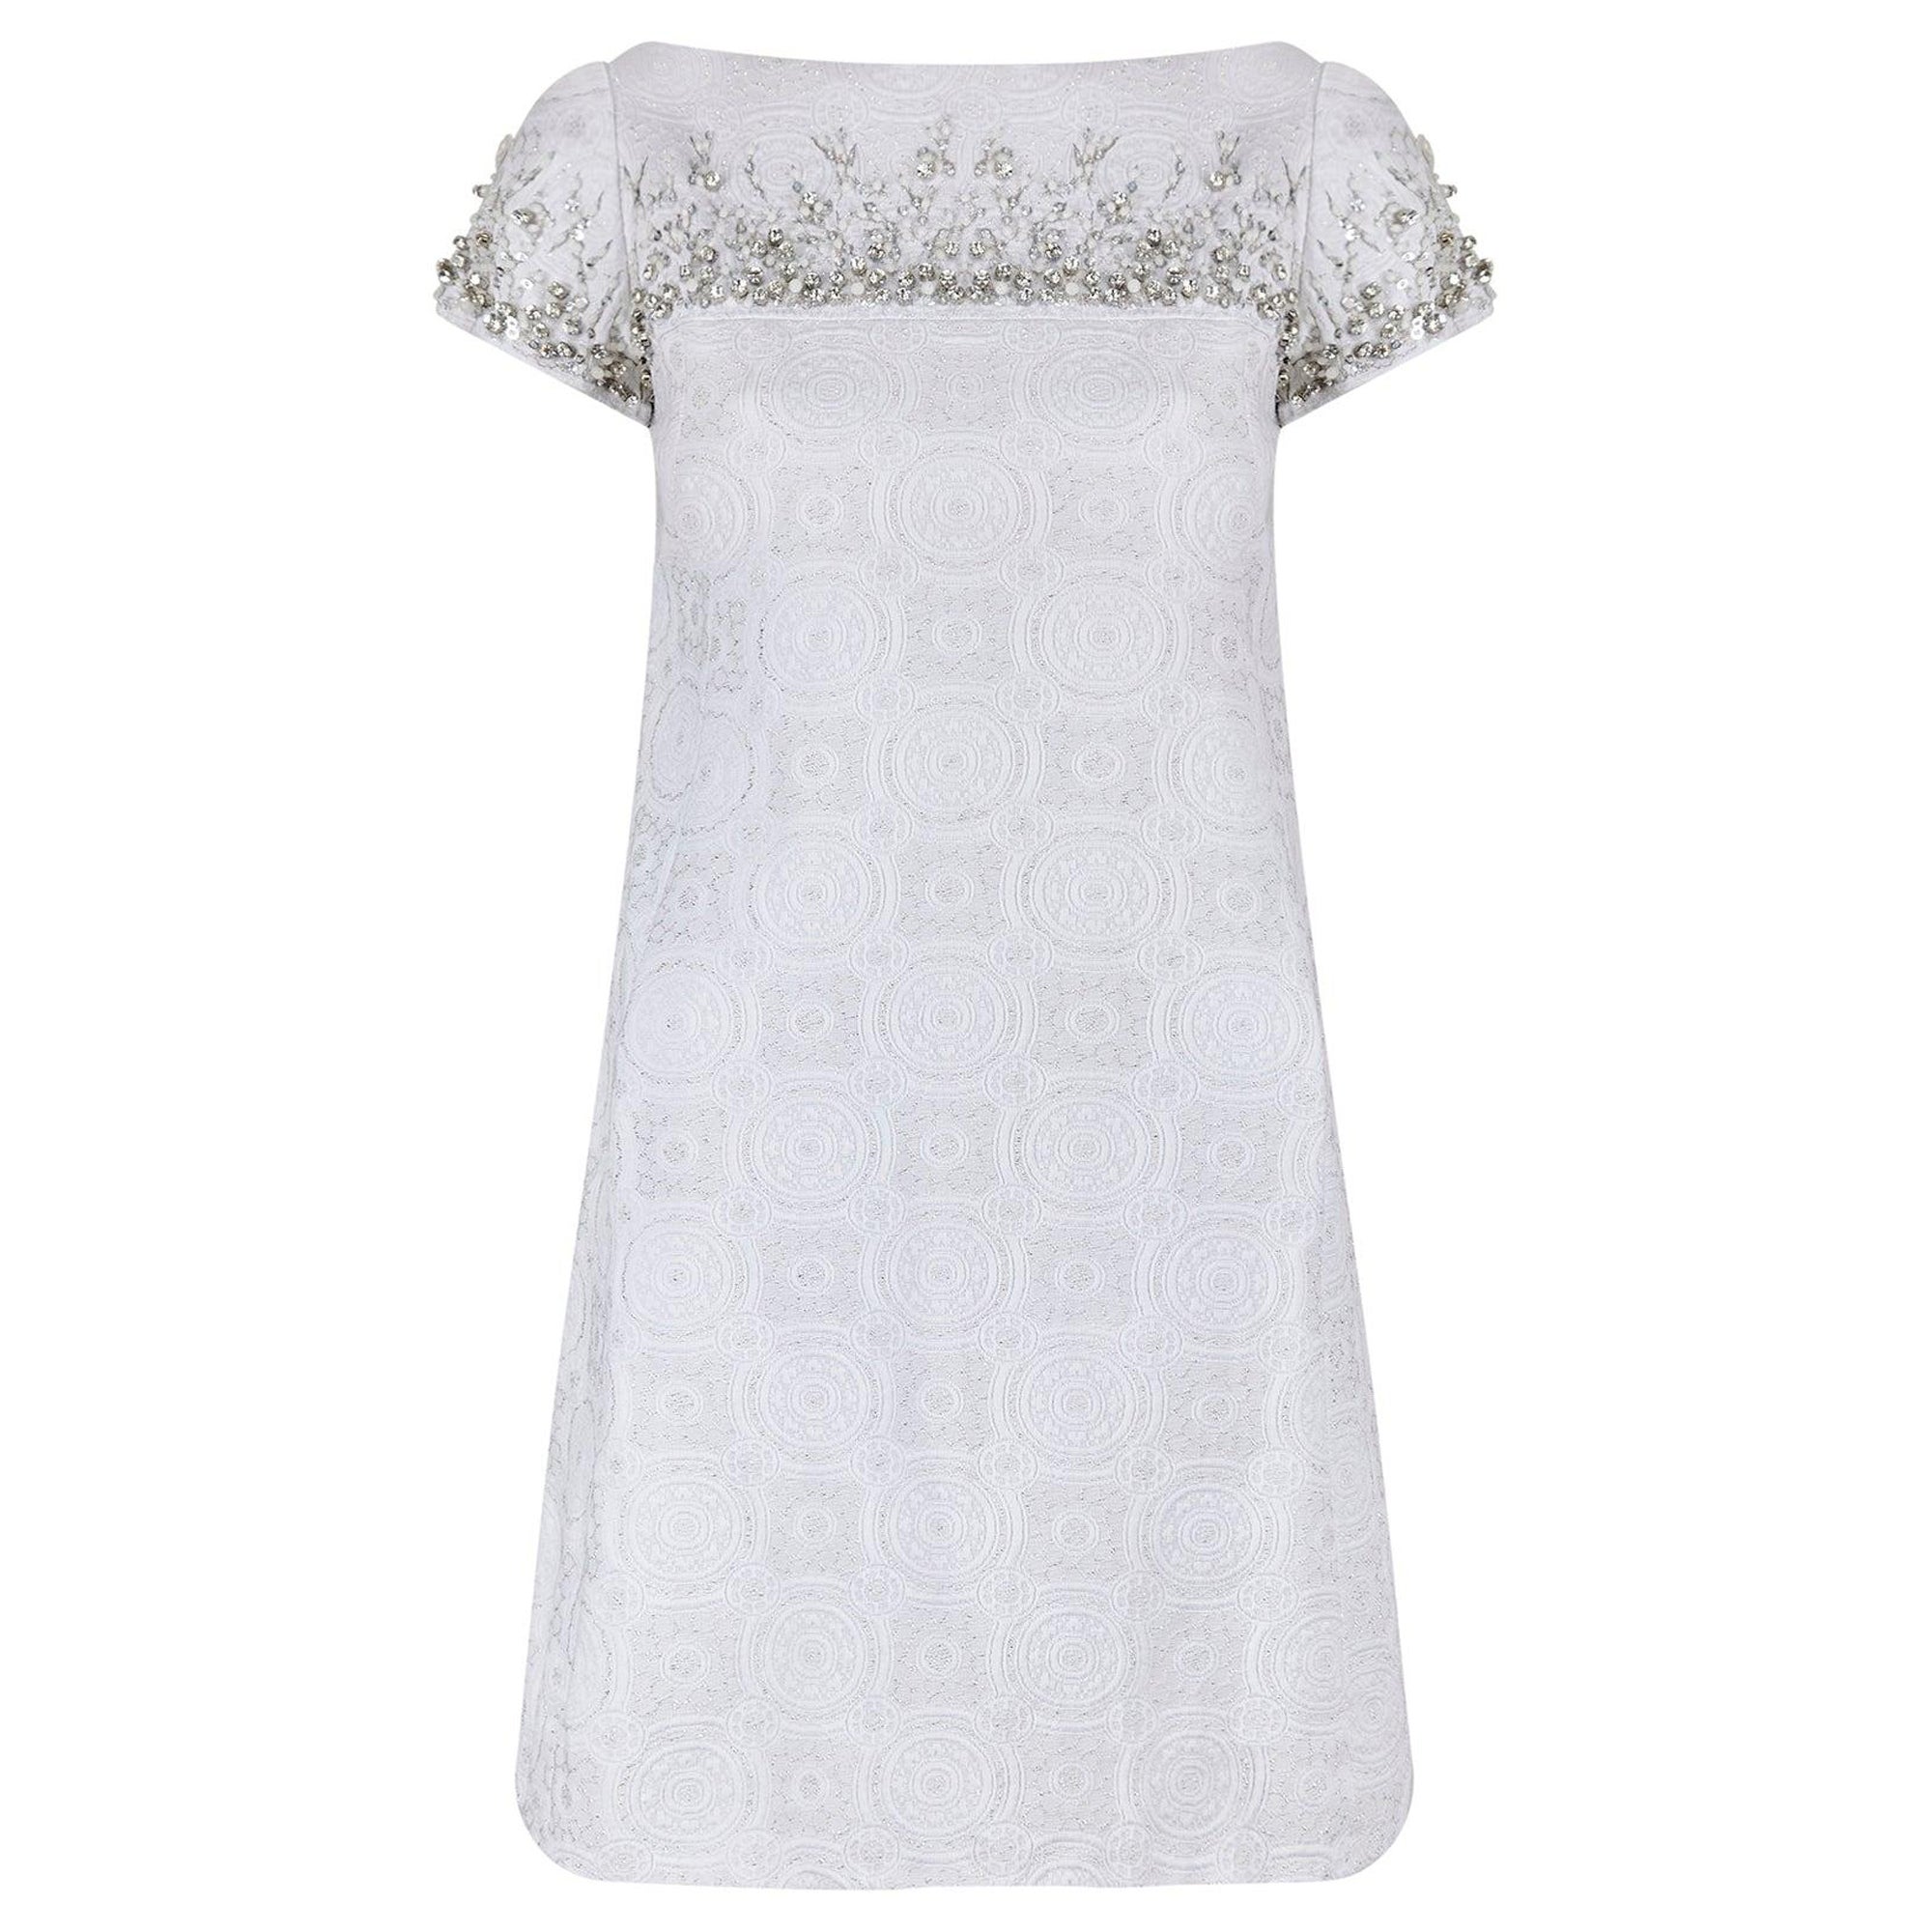 1960s Malcolm Starr Diamante White and Silver Weave Dress For Sale